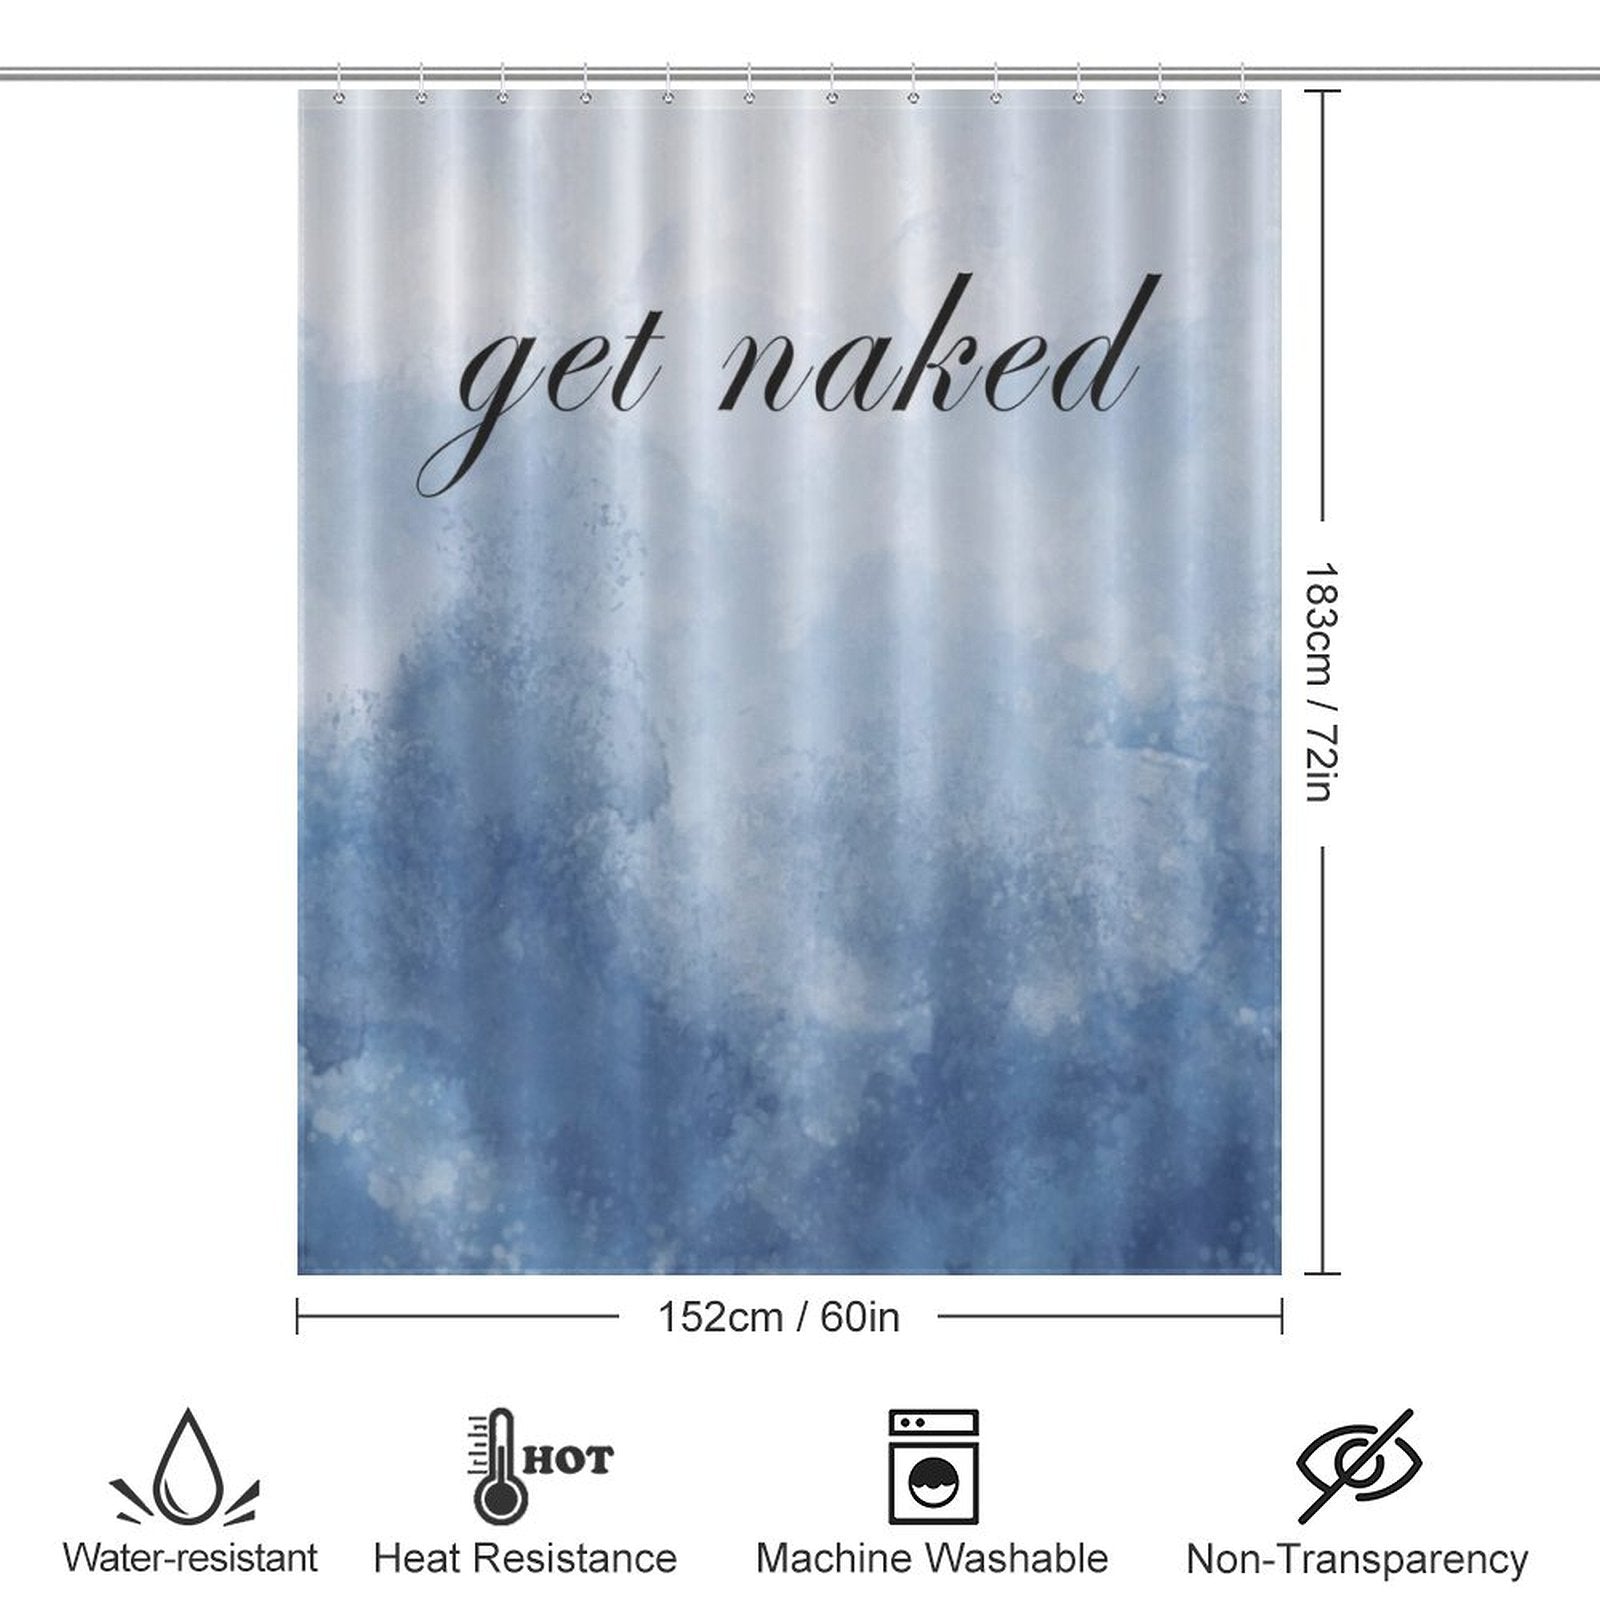 A Funny Letters Abstract Blue Get Naked Shower Curtain-Cottoncat with an abstract blue and white gradient background and the words "get naked" in funny letters printed on it. This Cotton Cat get naked shower curtain measures 183 cm by 152 cm, is water-resistant, heat resistant, machine washable, and non-transparent.